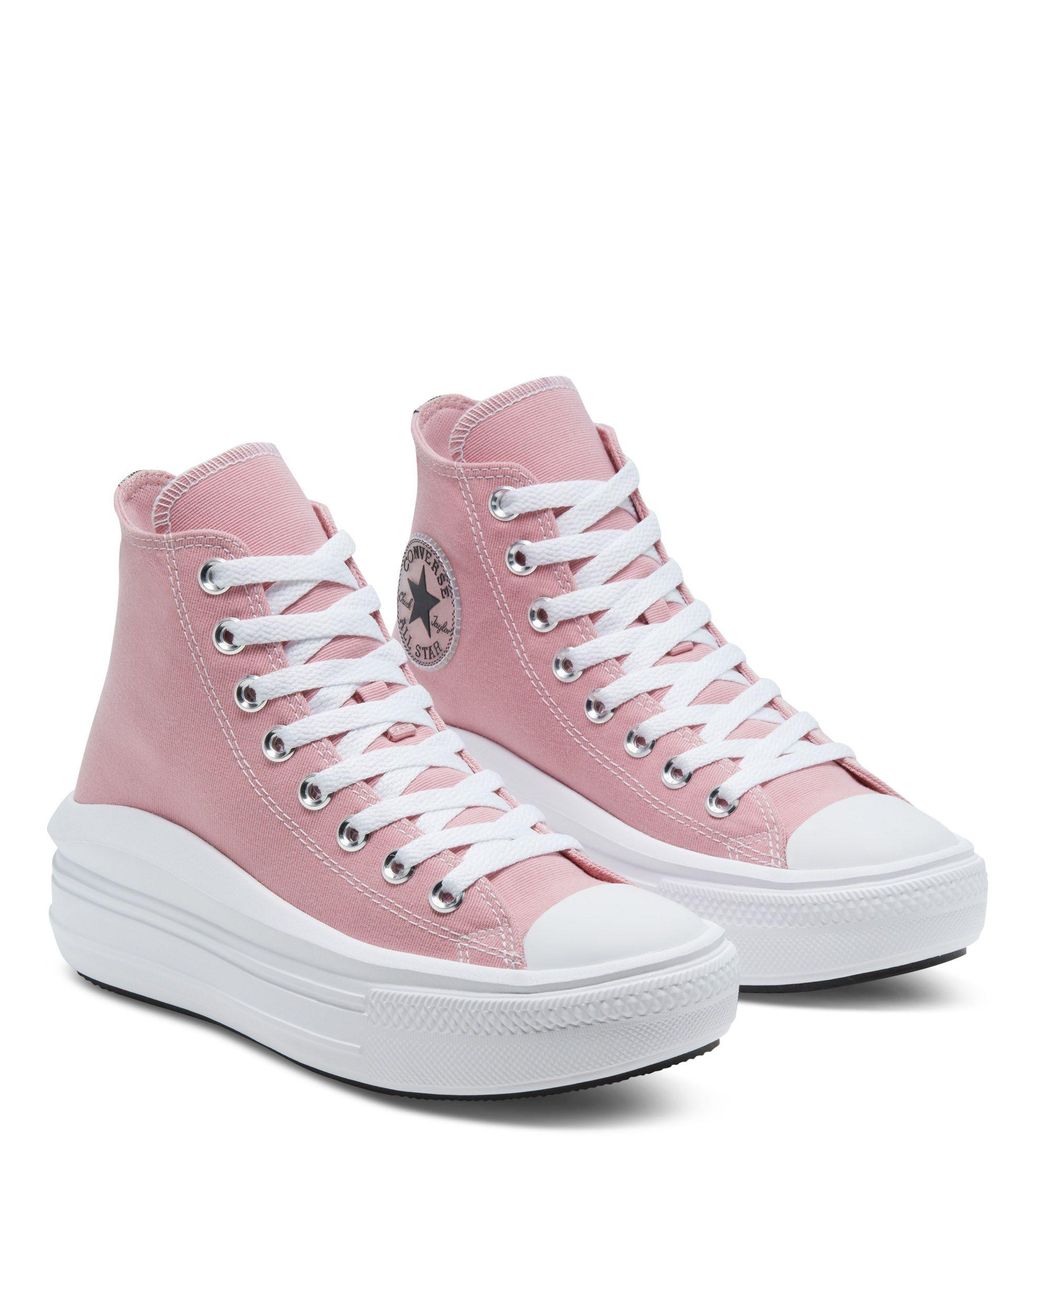 Converse Move Platform High-top Sneakers in Pink | Lyst Canada